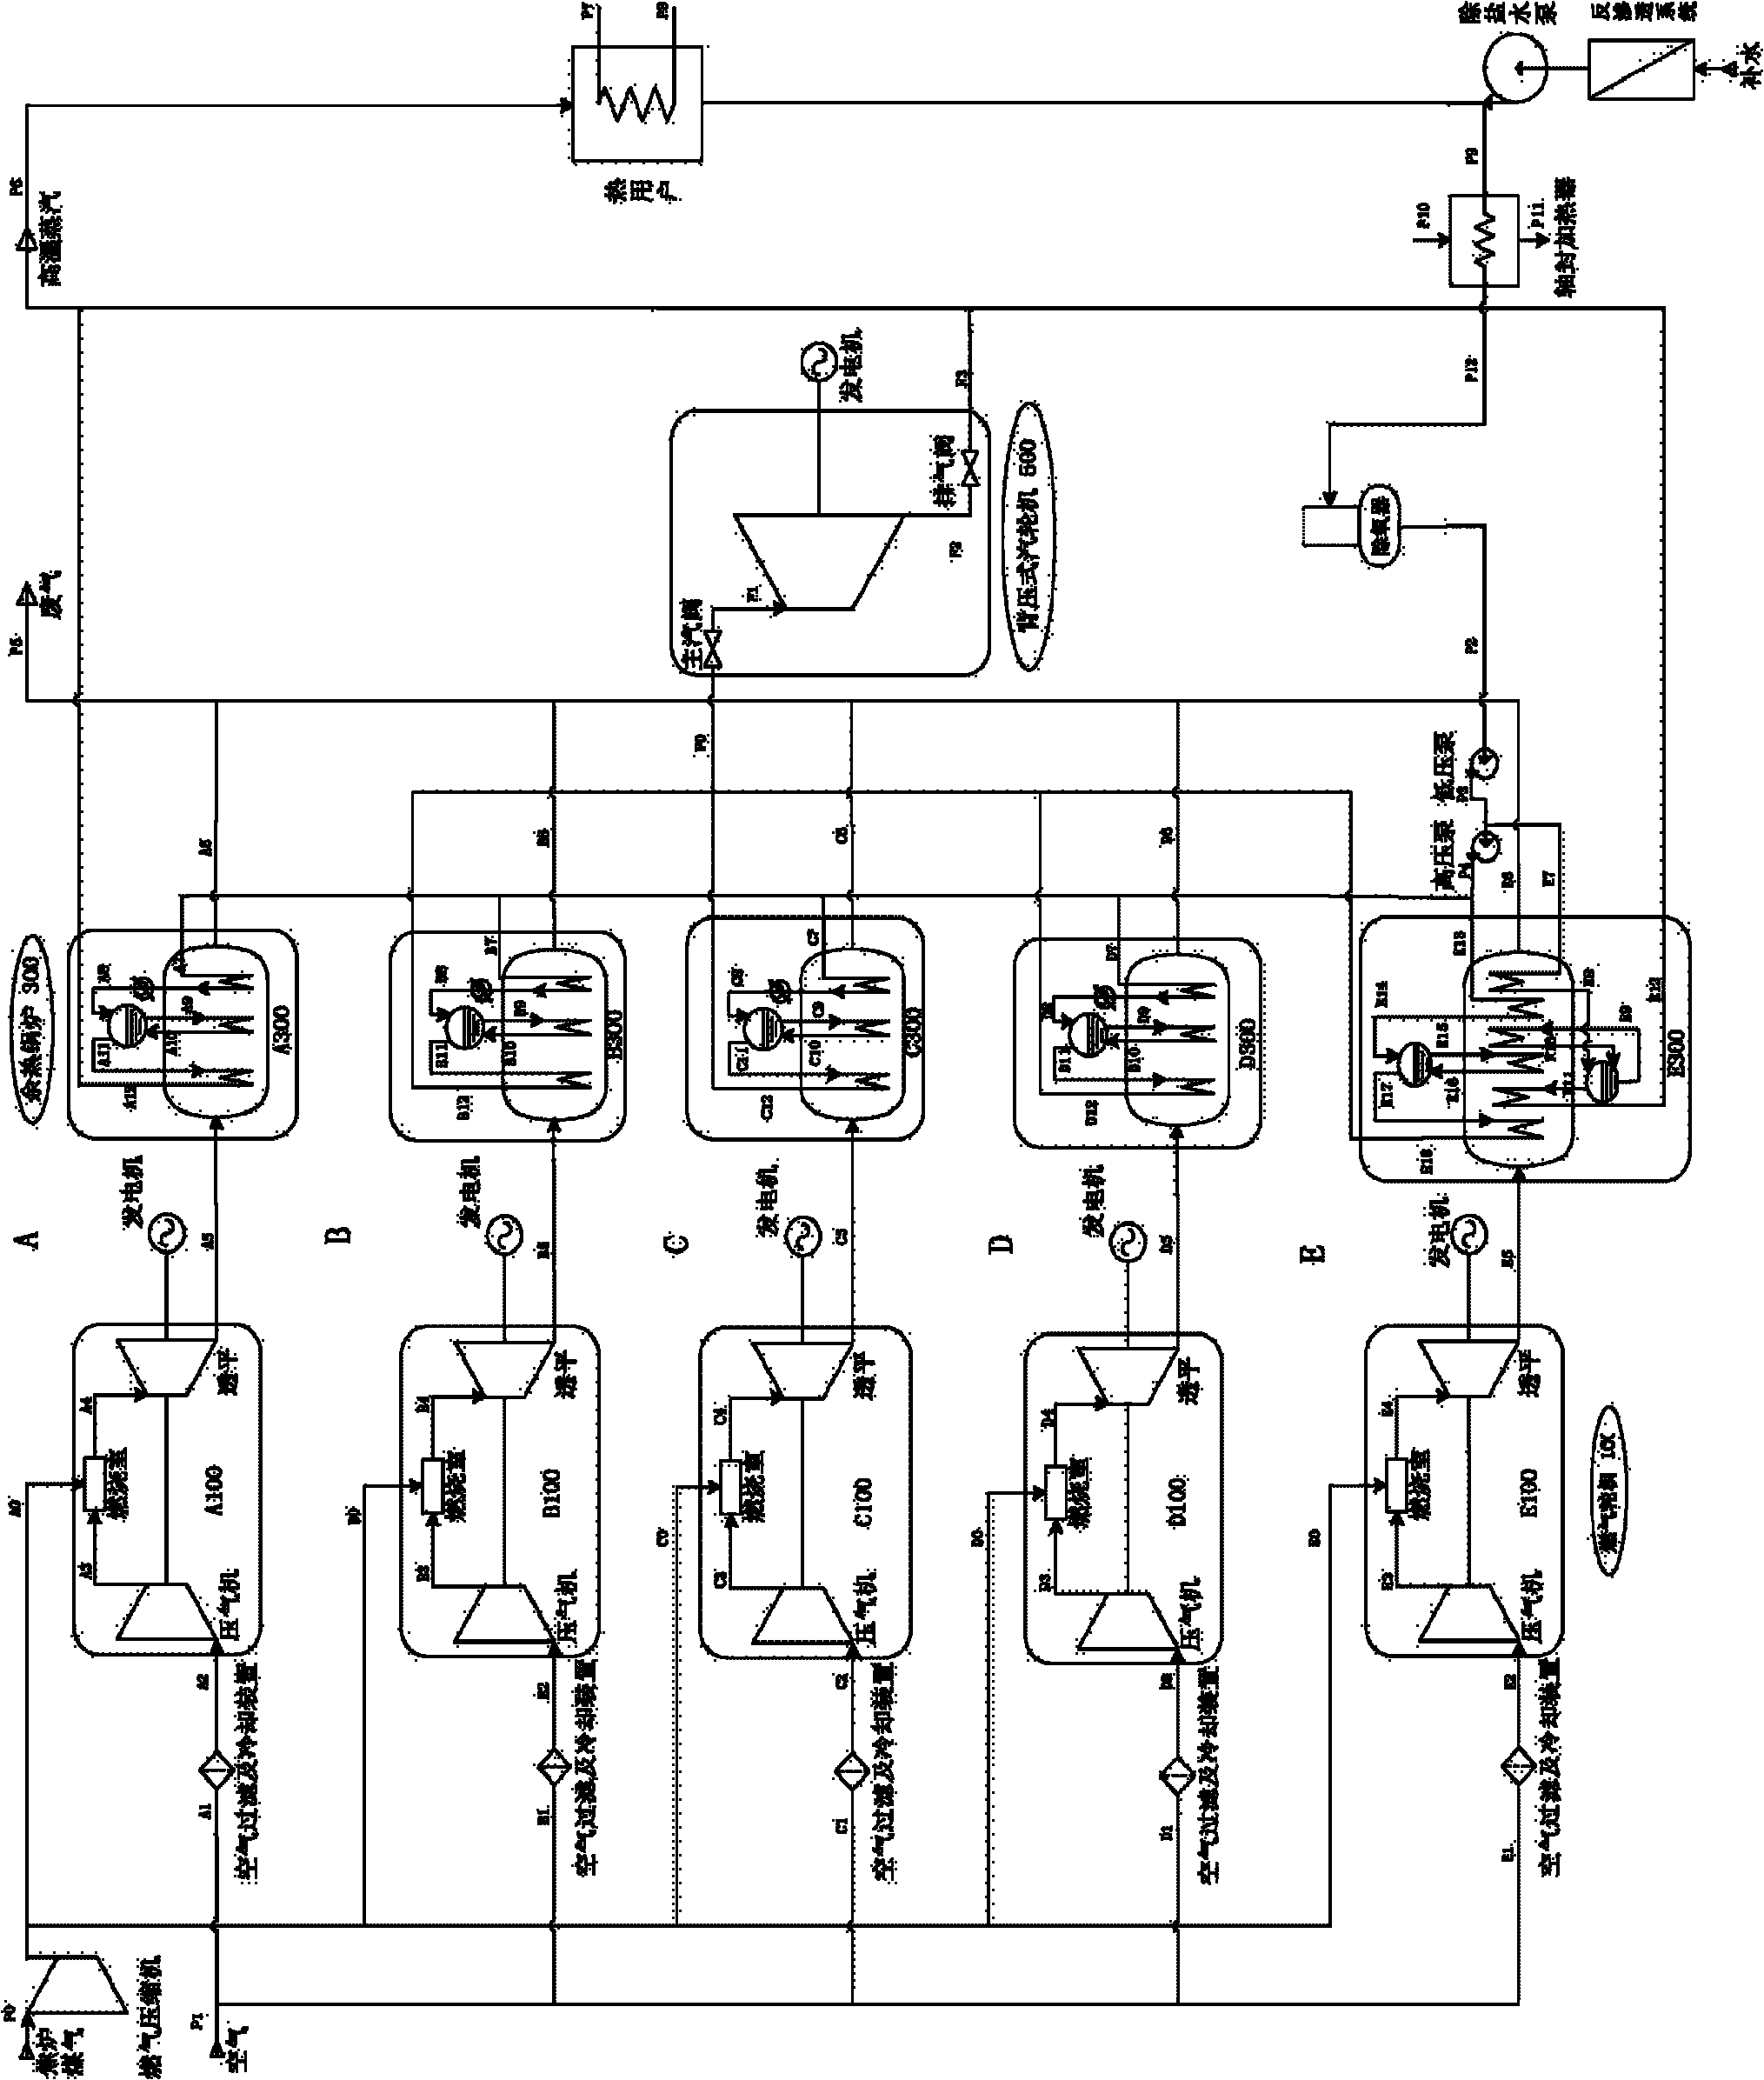 Combined cycle and combined heat and power (CHP) equipment and process